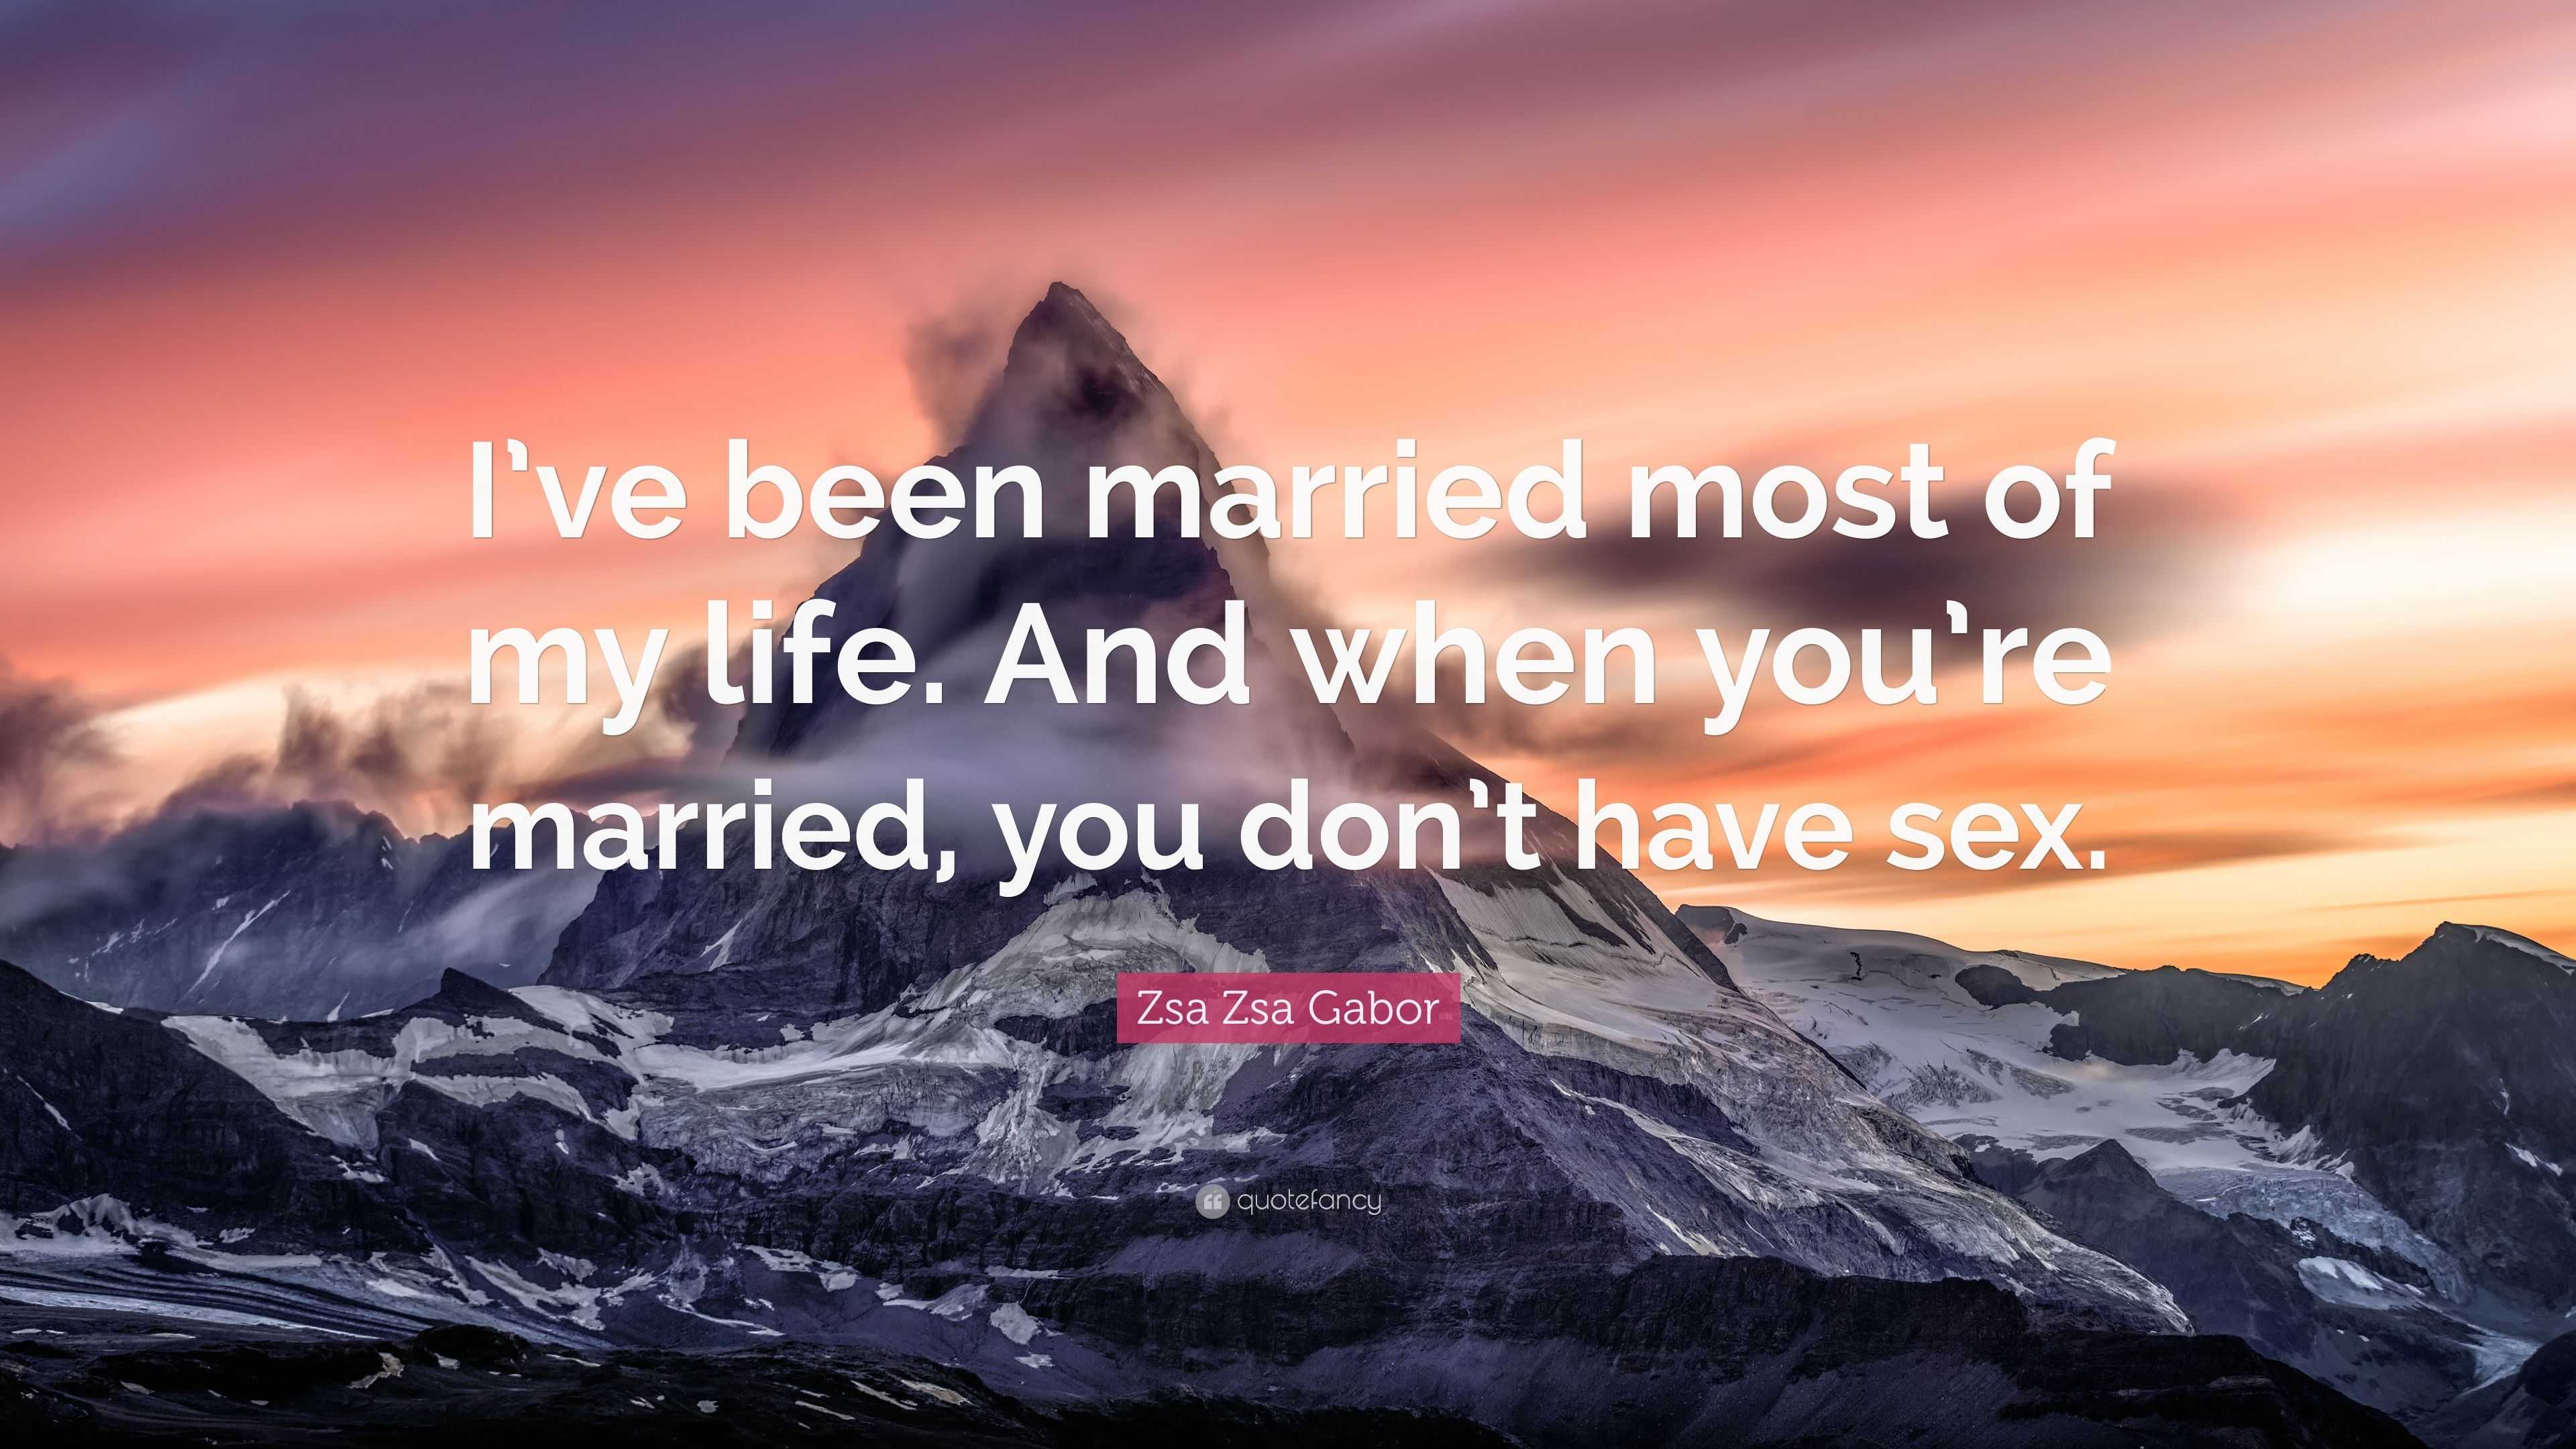 Zsa Zsa Gabor Quote “ive Been Married Most Of My Life And When Youre Married You Dont Have 6525